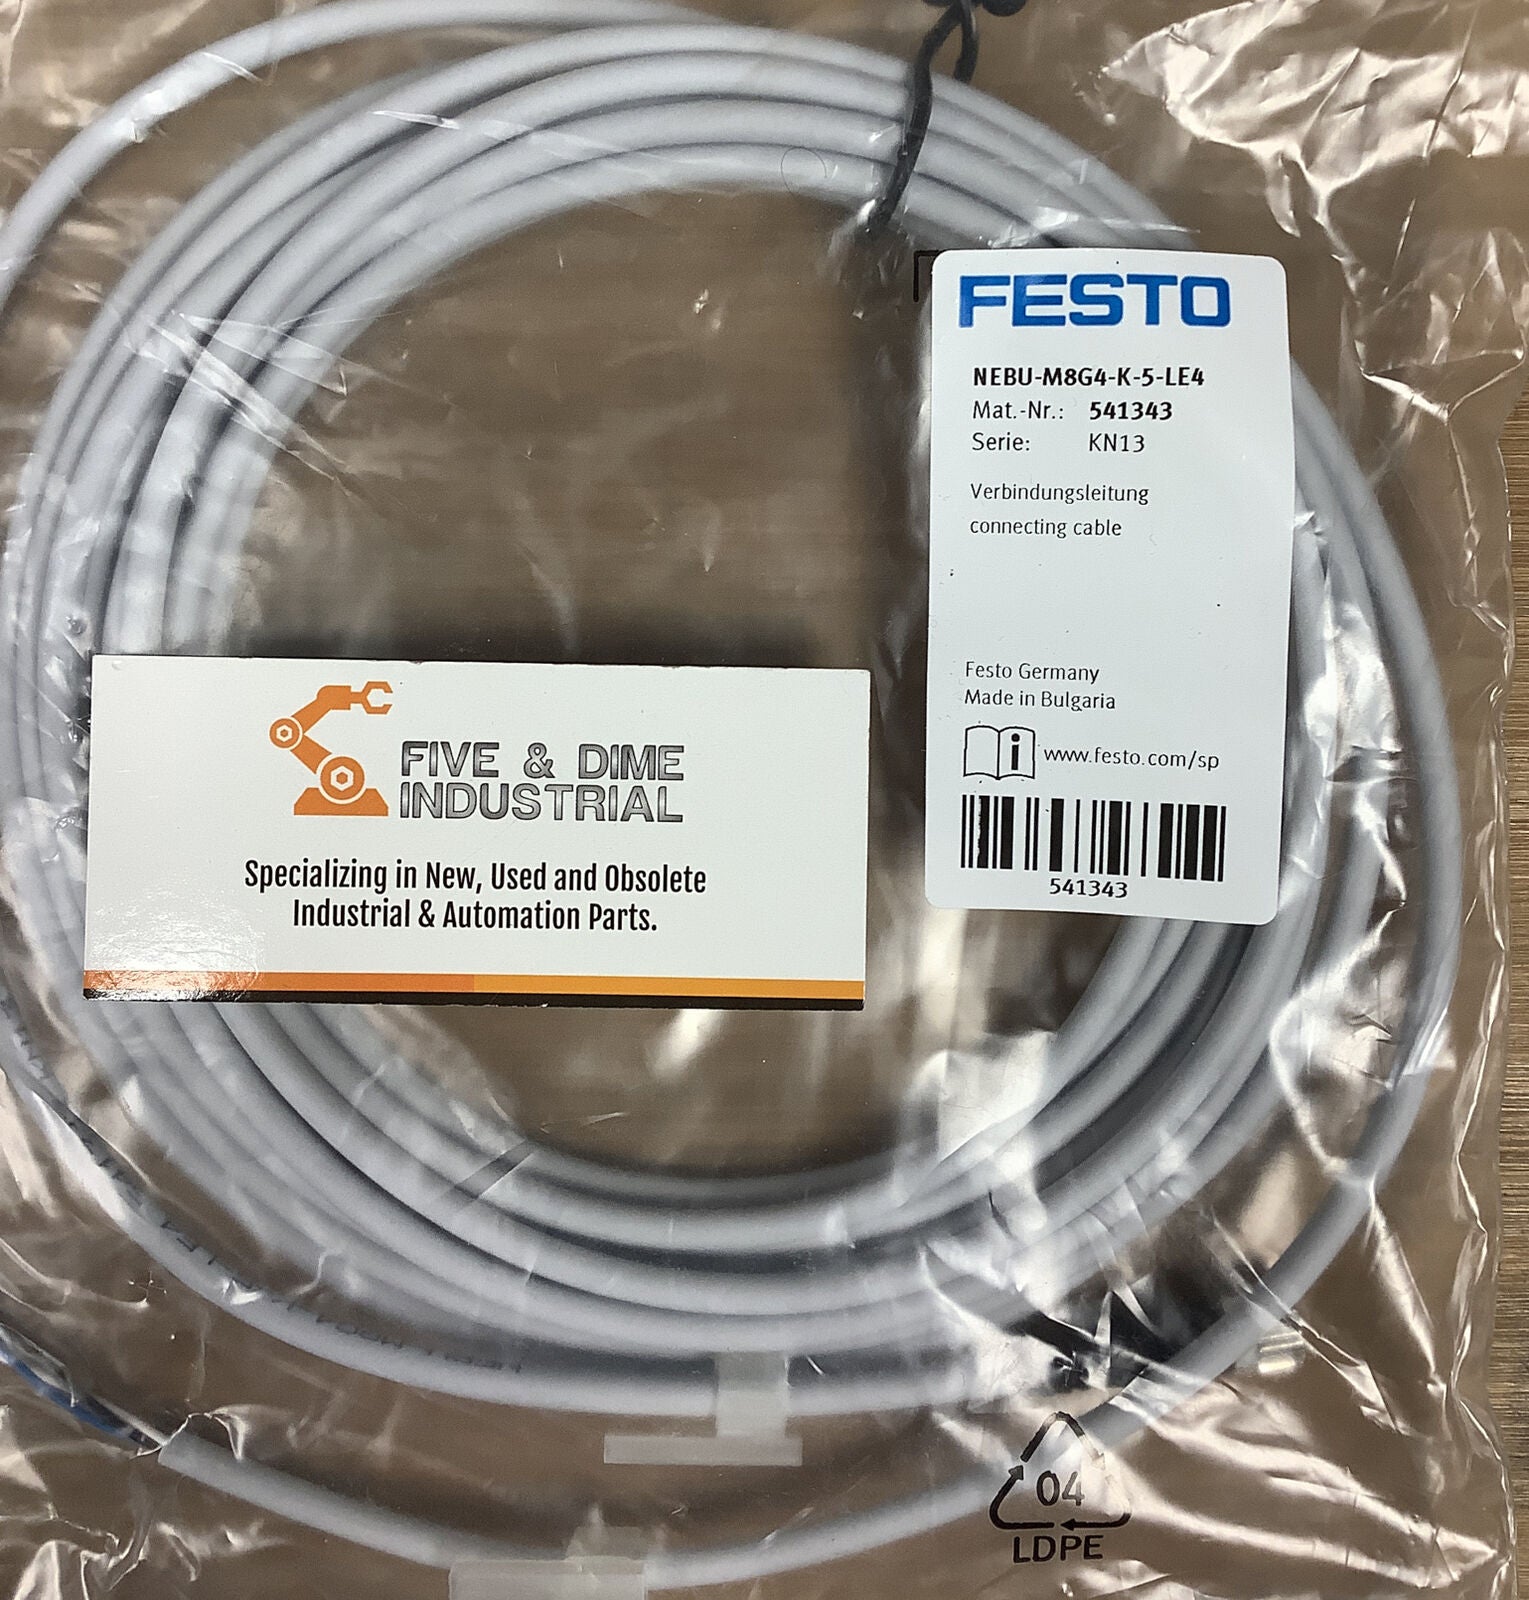 Festo NEBU-M8G4-K-5-LE4 New Connecting Cable (CL307)